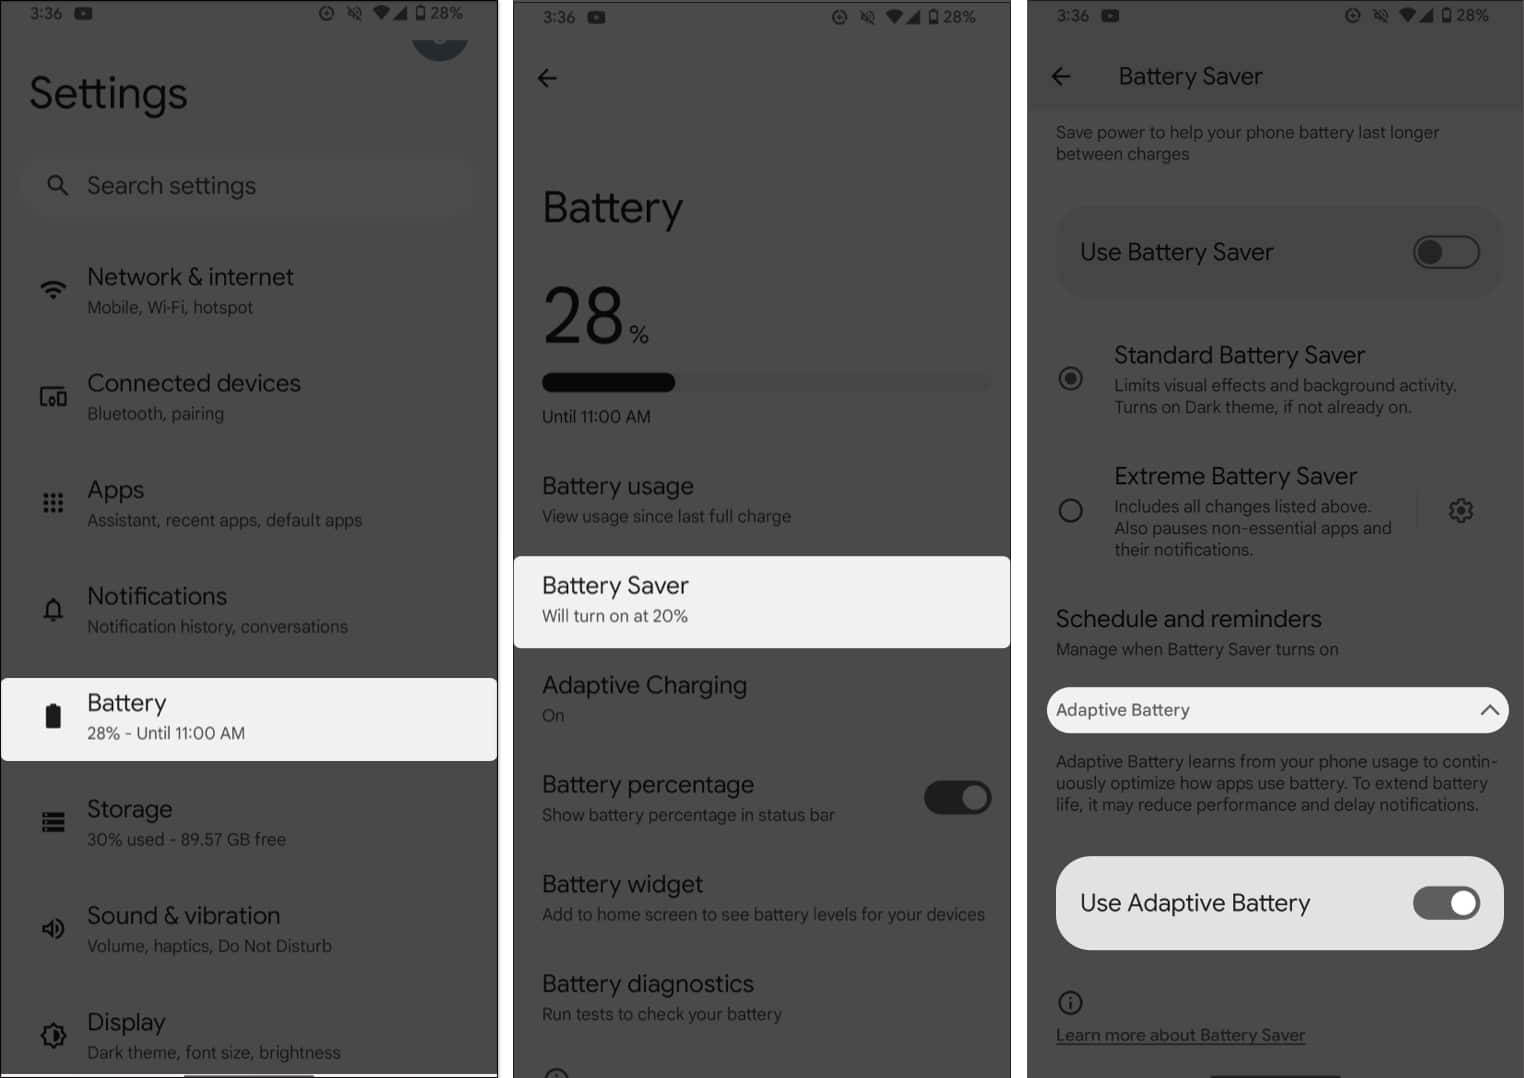 Schedule and reminders in Battery Saver